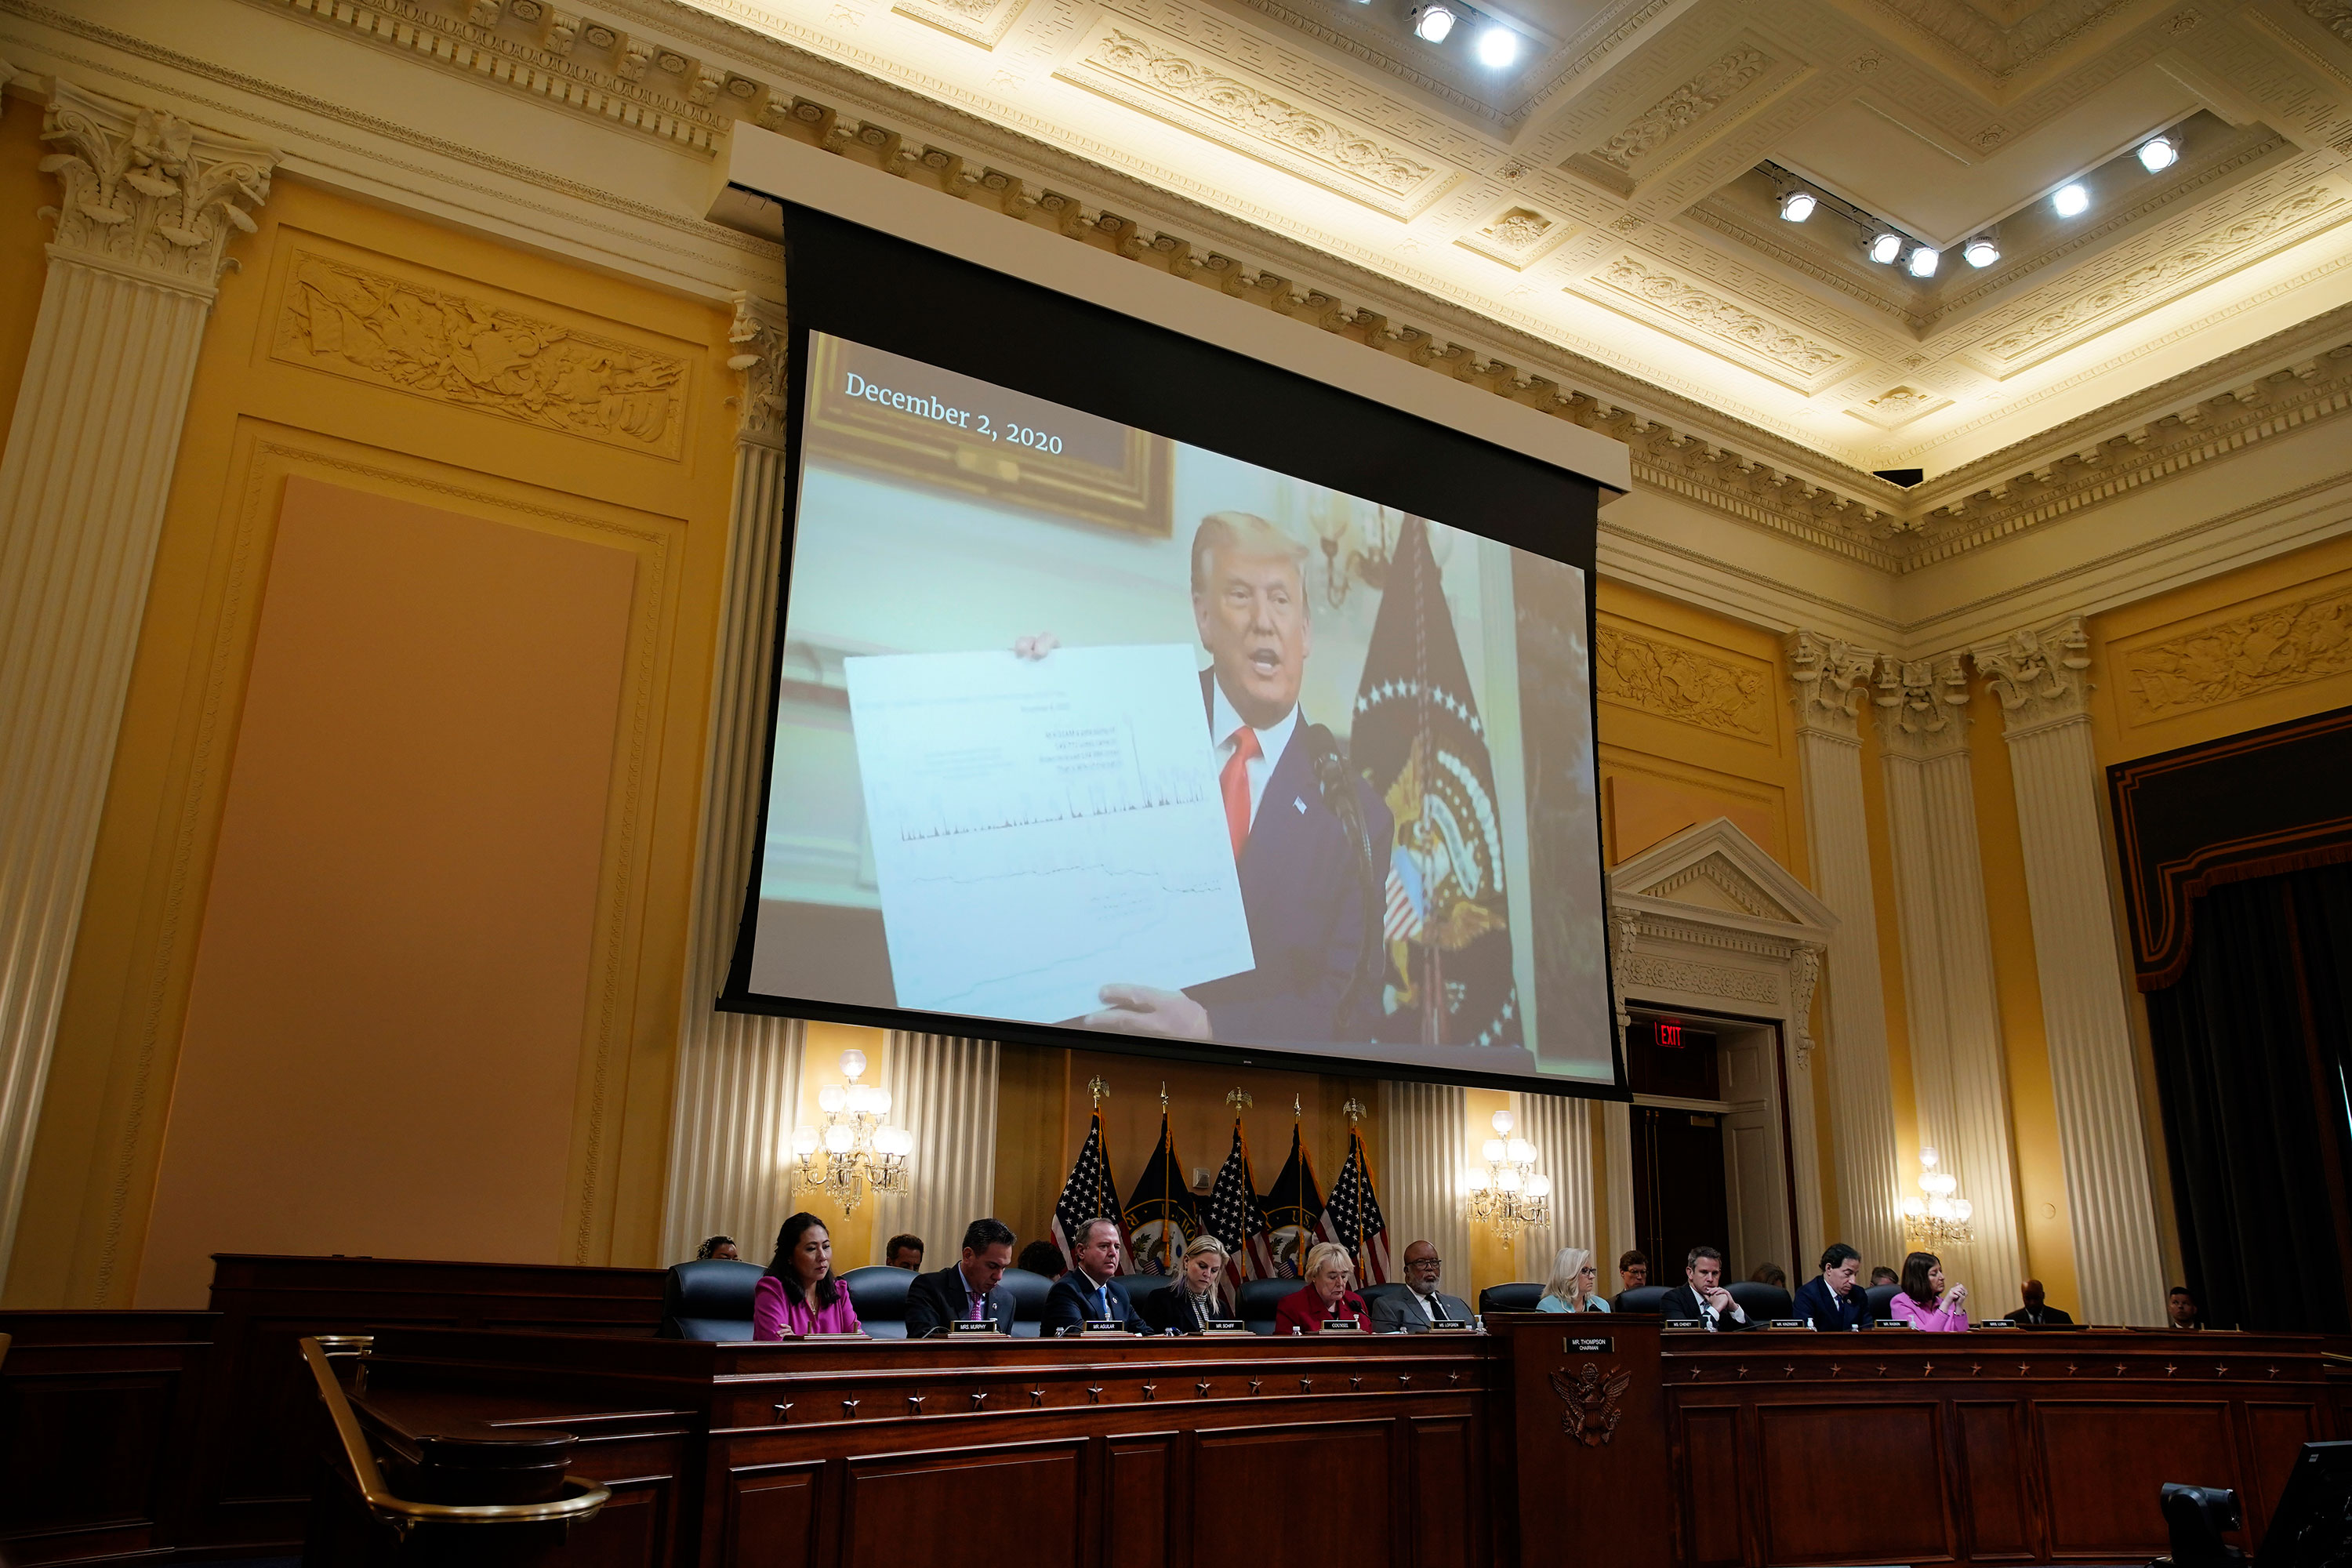 An image of Former US President Donald Trump is displayed on a screen during a hearing of the Select Committee to Investigate the January 6th Attack on the US Capitol in Washington on June 13.